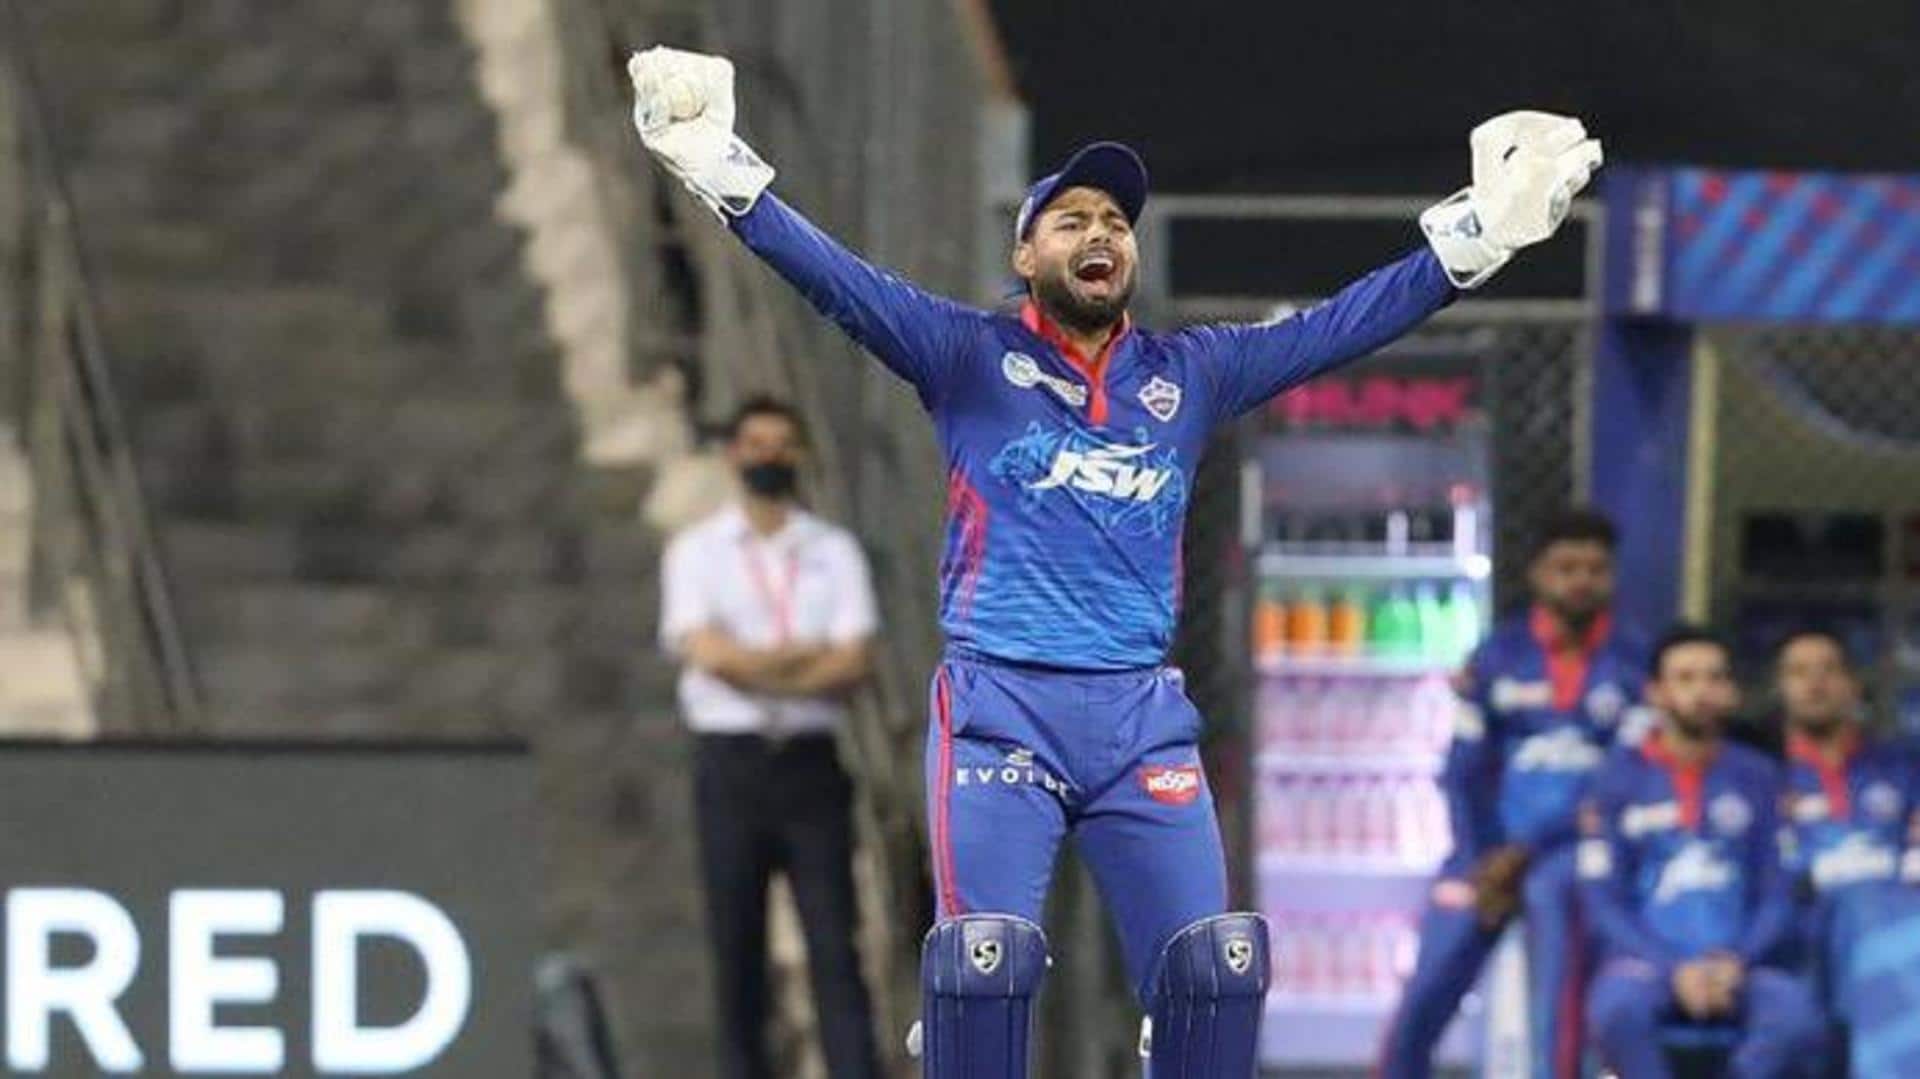 Five wicket-keepers who could replace Rishabh Pant at Delhi Capitals